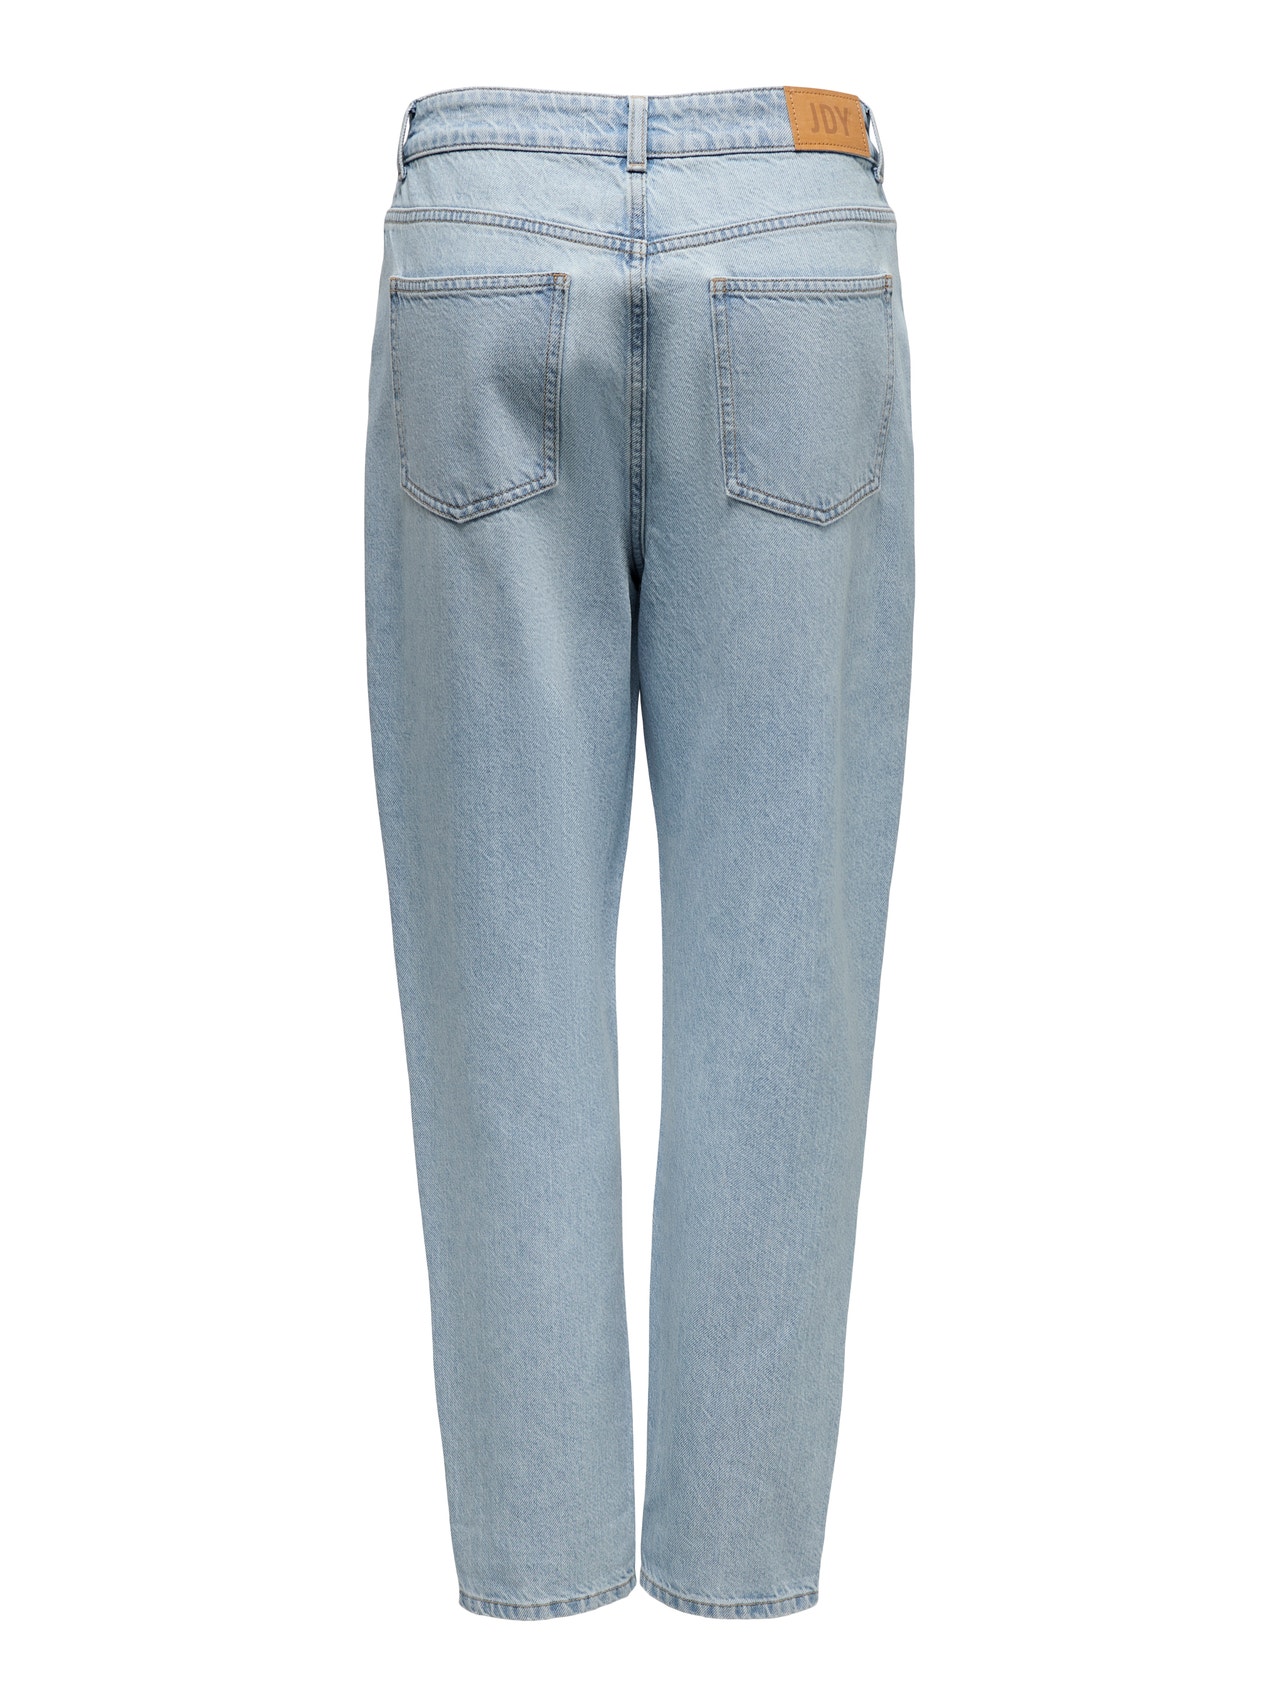 ONLY Straight Fit High waist Ripped hems Jeans -Light Blue - 15270098